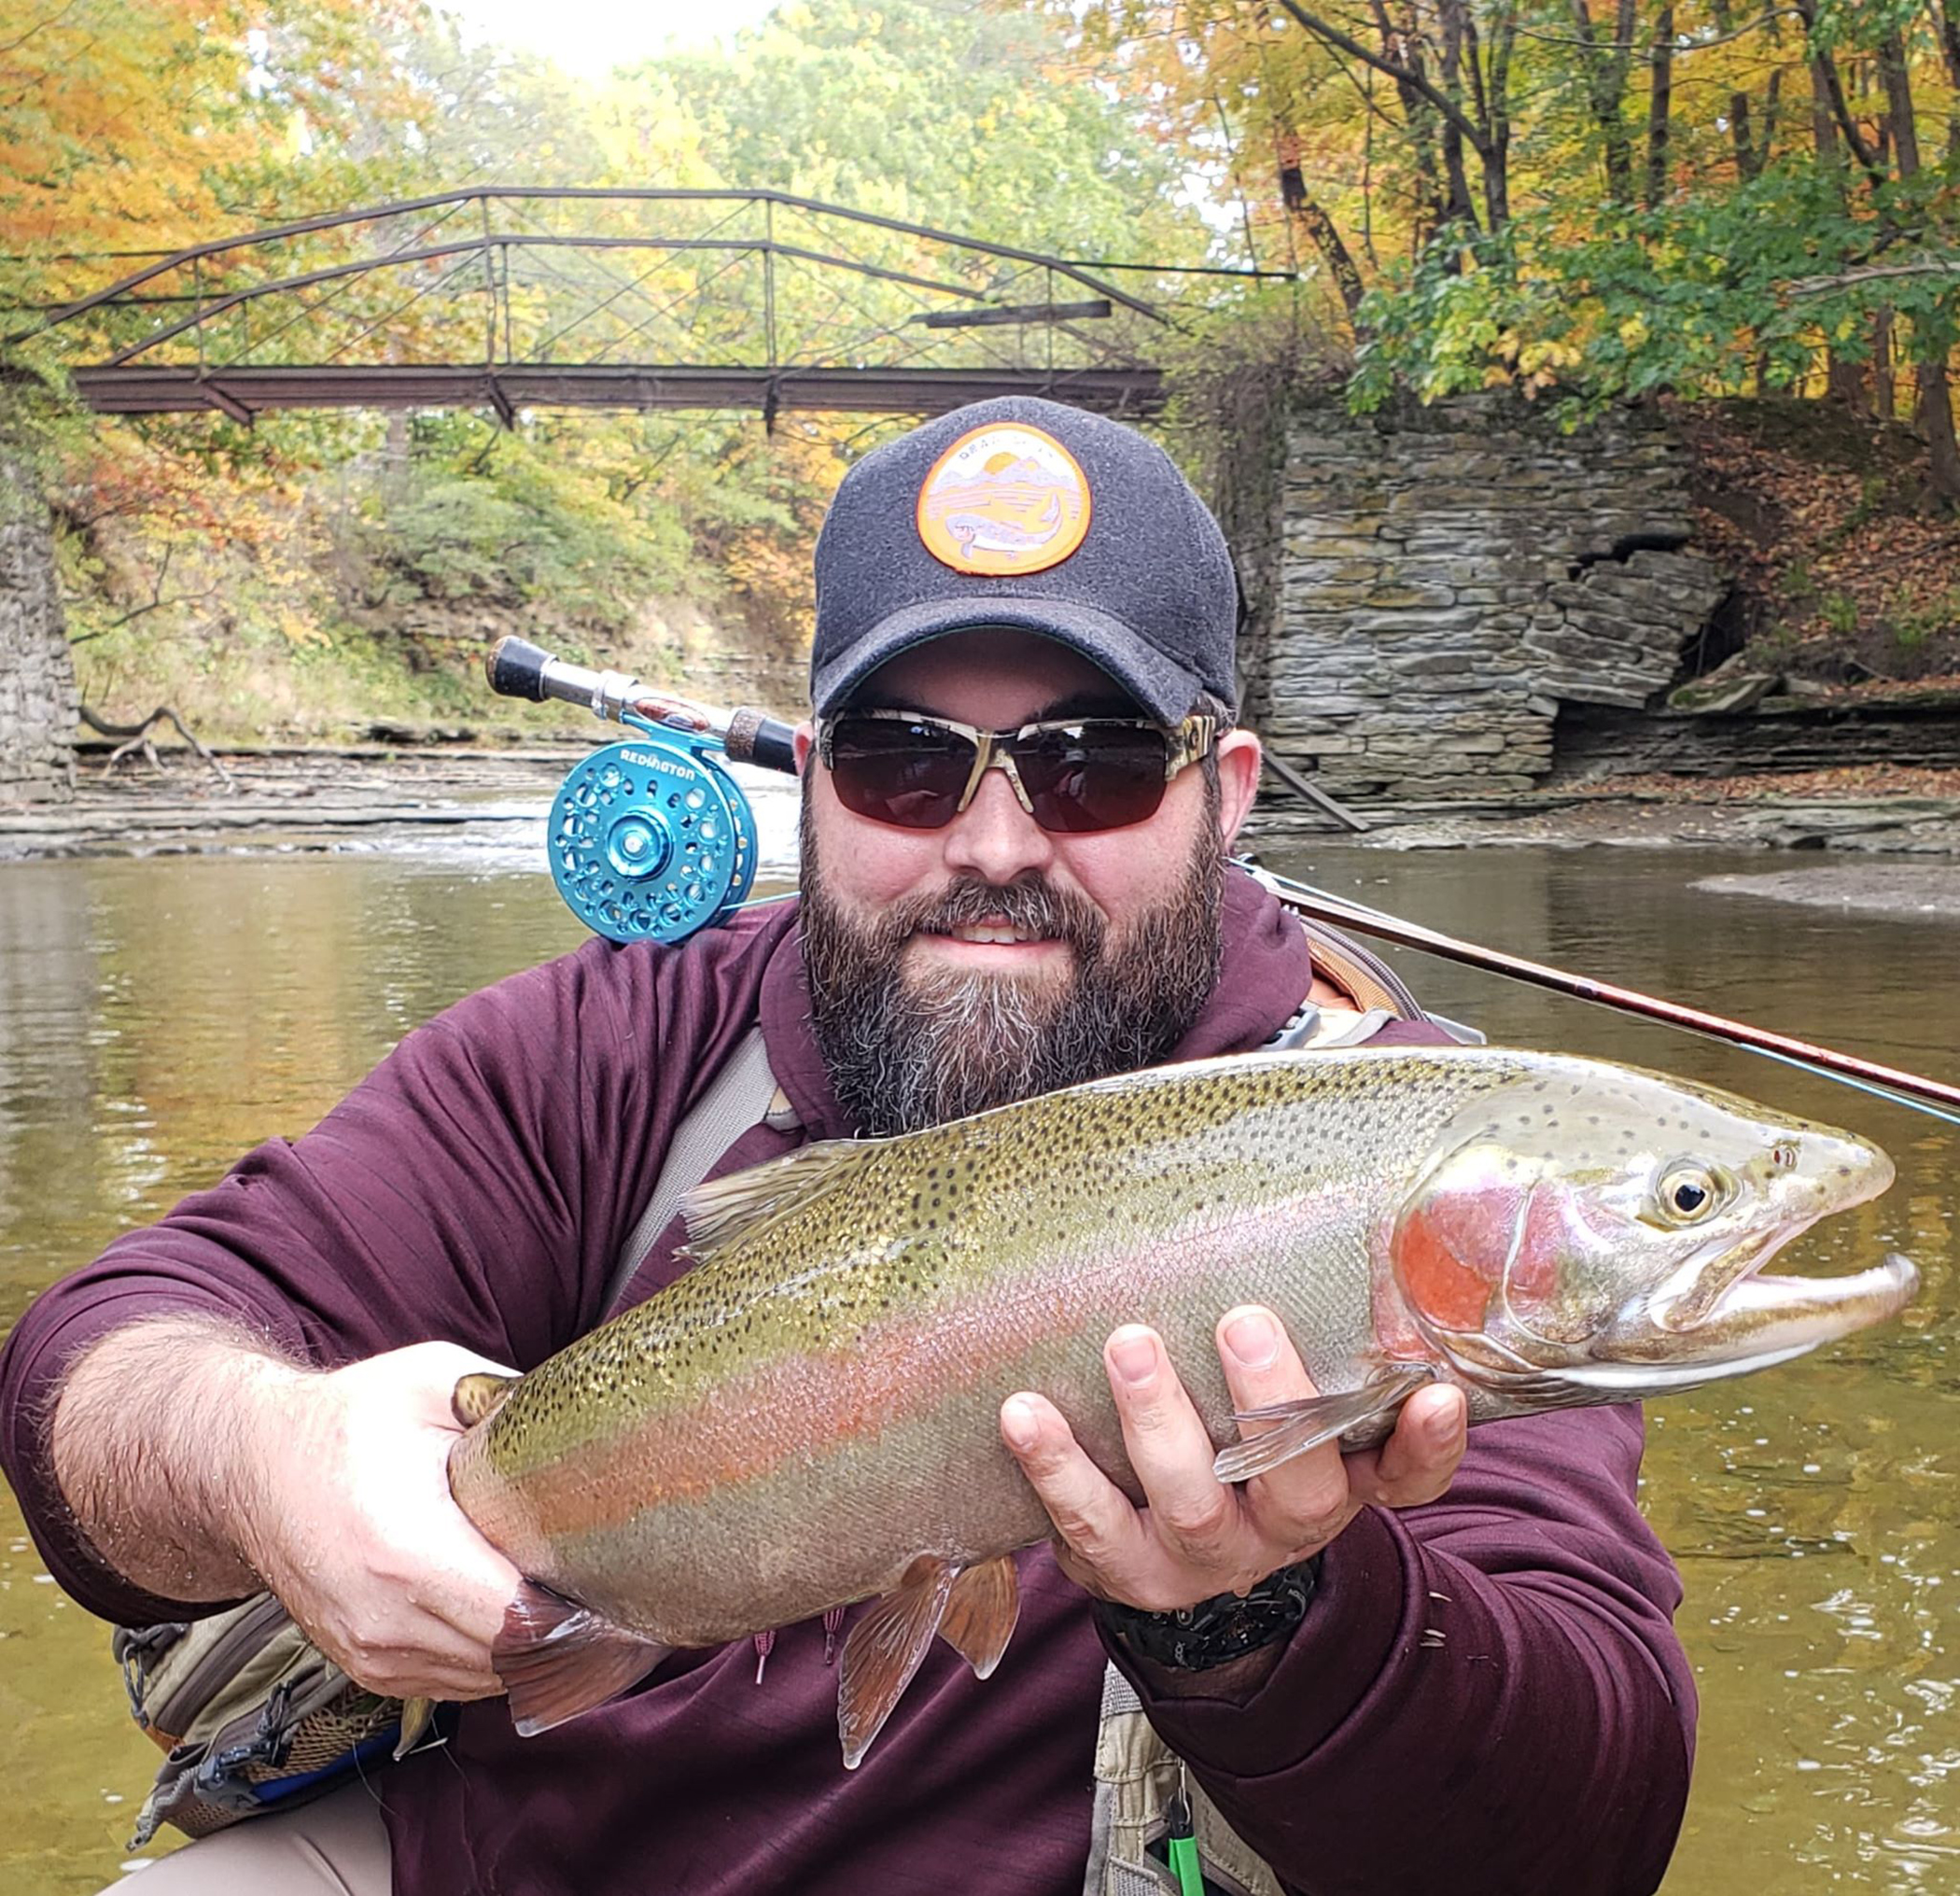 The fly guy: Blake Mattern's passion for fly tying, fishing